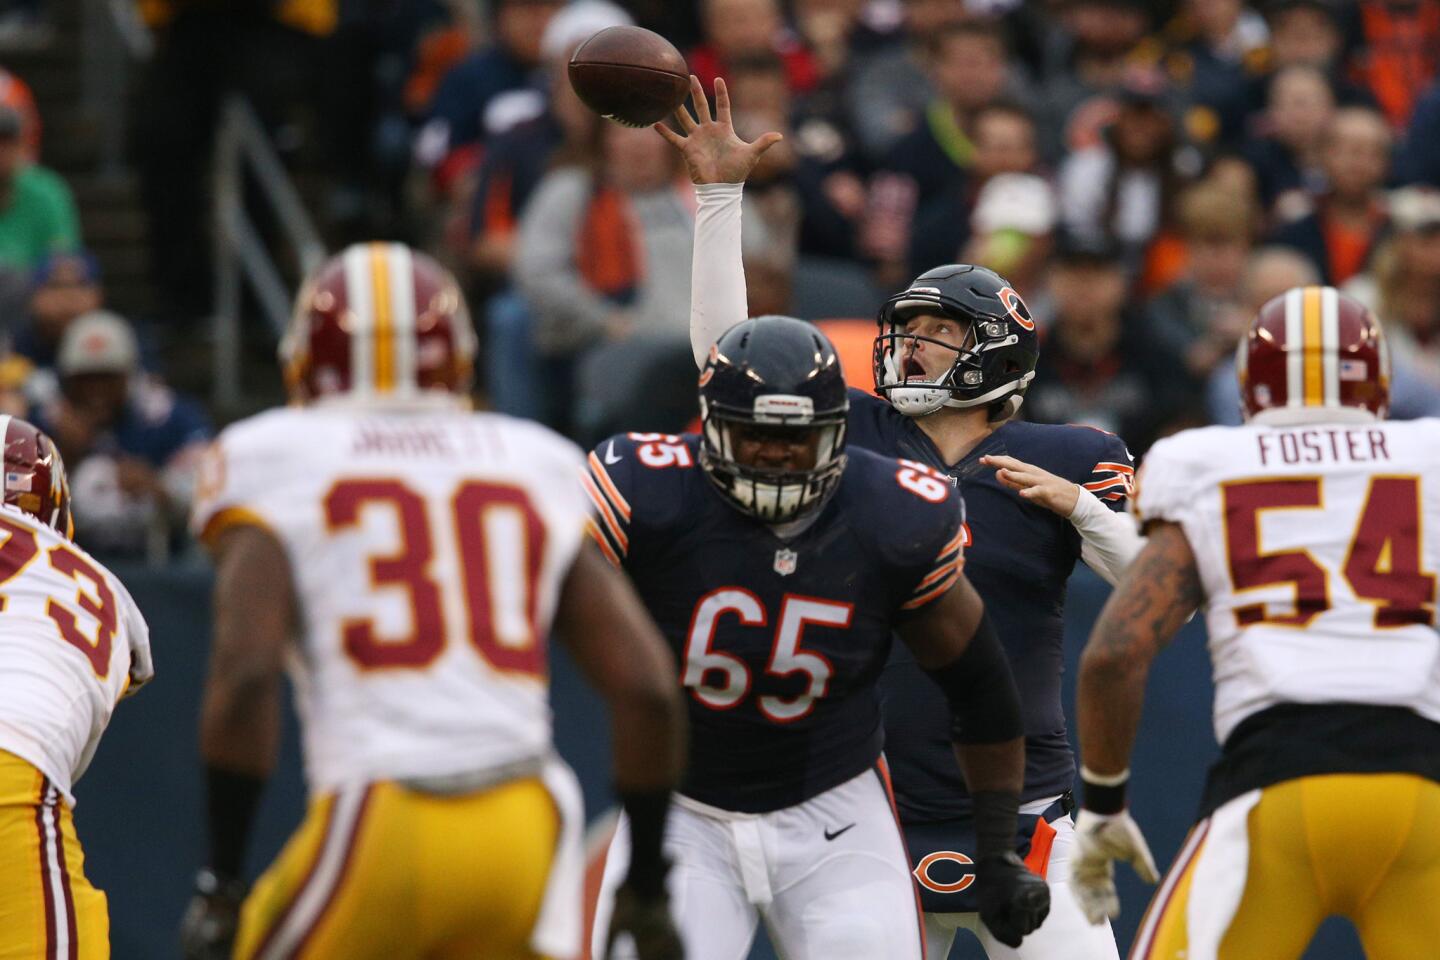 Jay Cutler nearly fumbles the snap during the first half but gets off the pass for a first down against the Redskins.